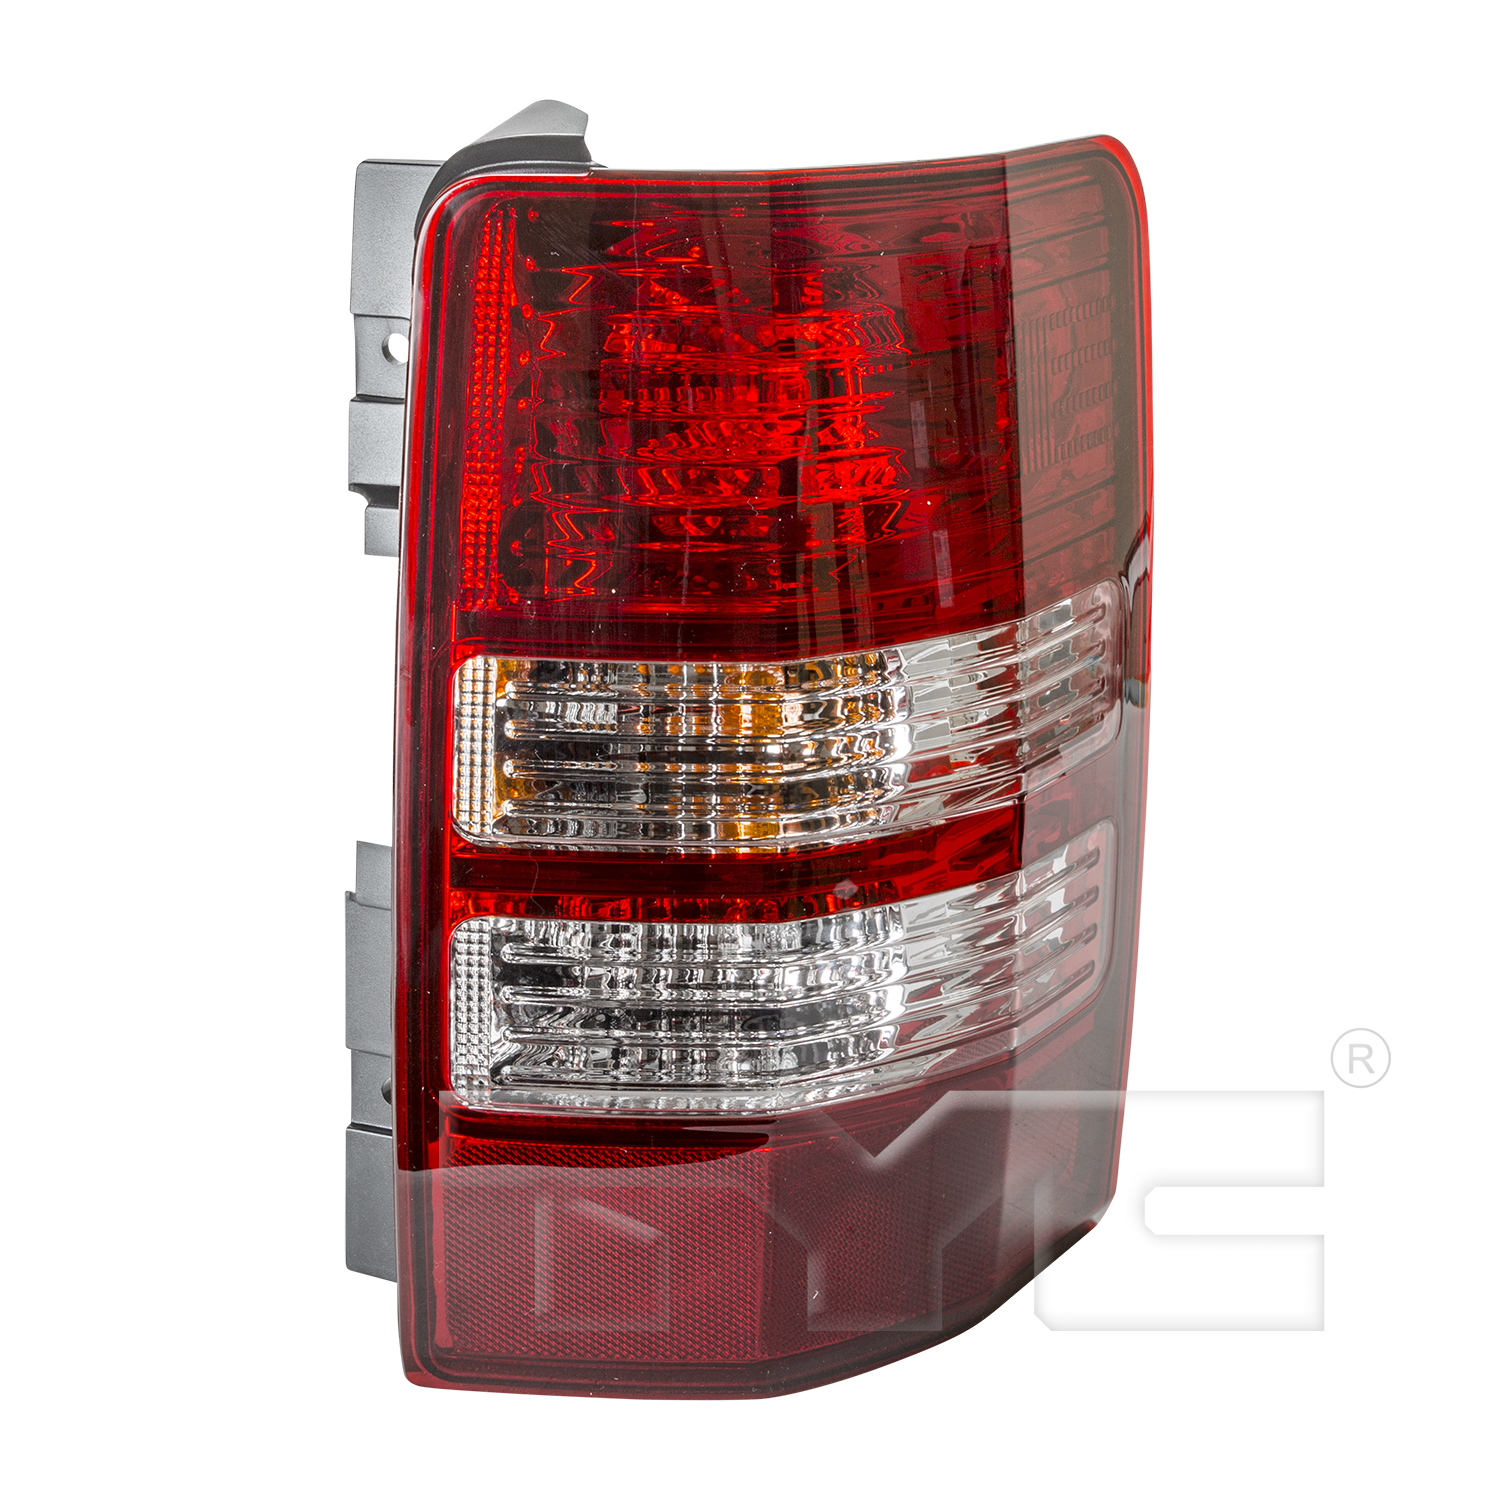 Aftermarket TAILLIGHTS for JEEP - LIBERTY, LIBERTY,08-12,RT Taillamp assy